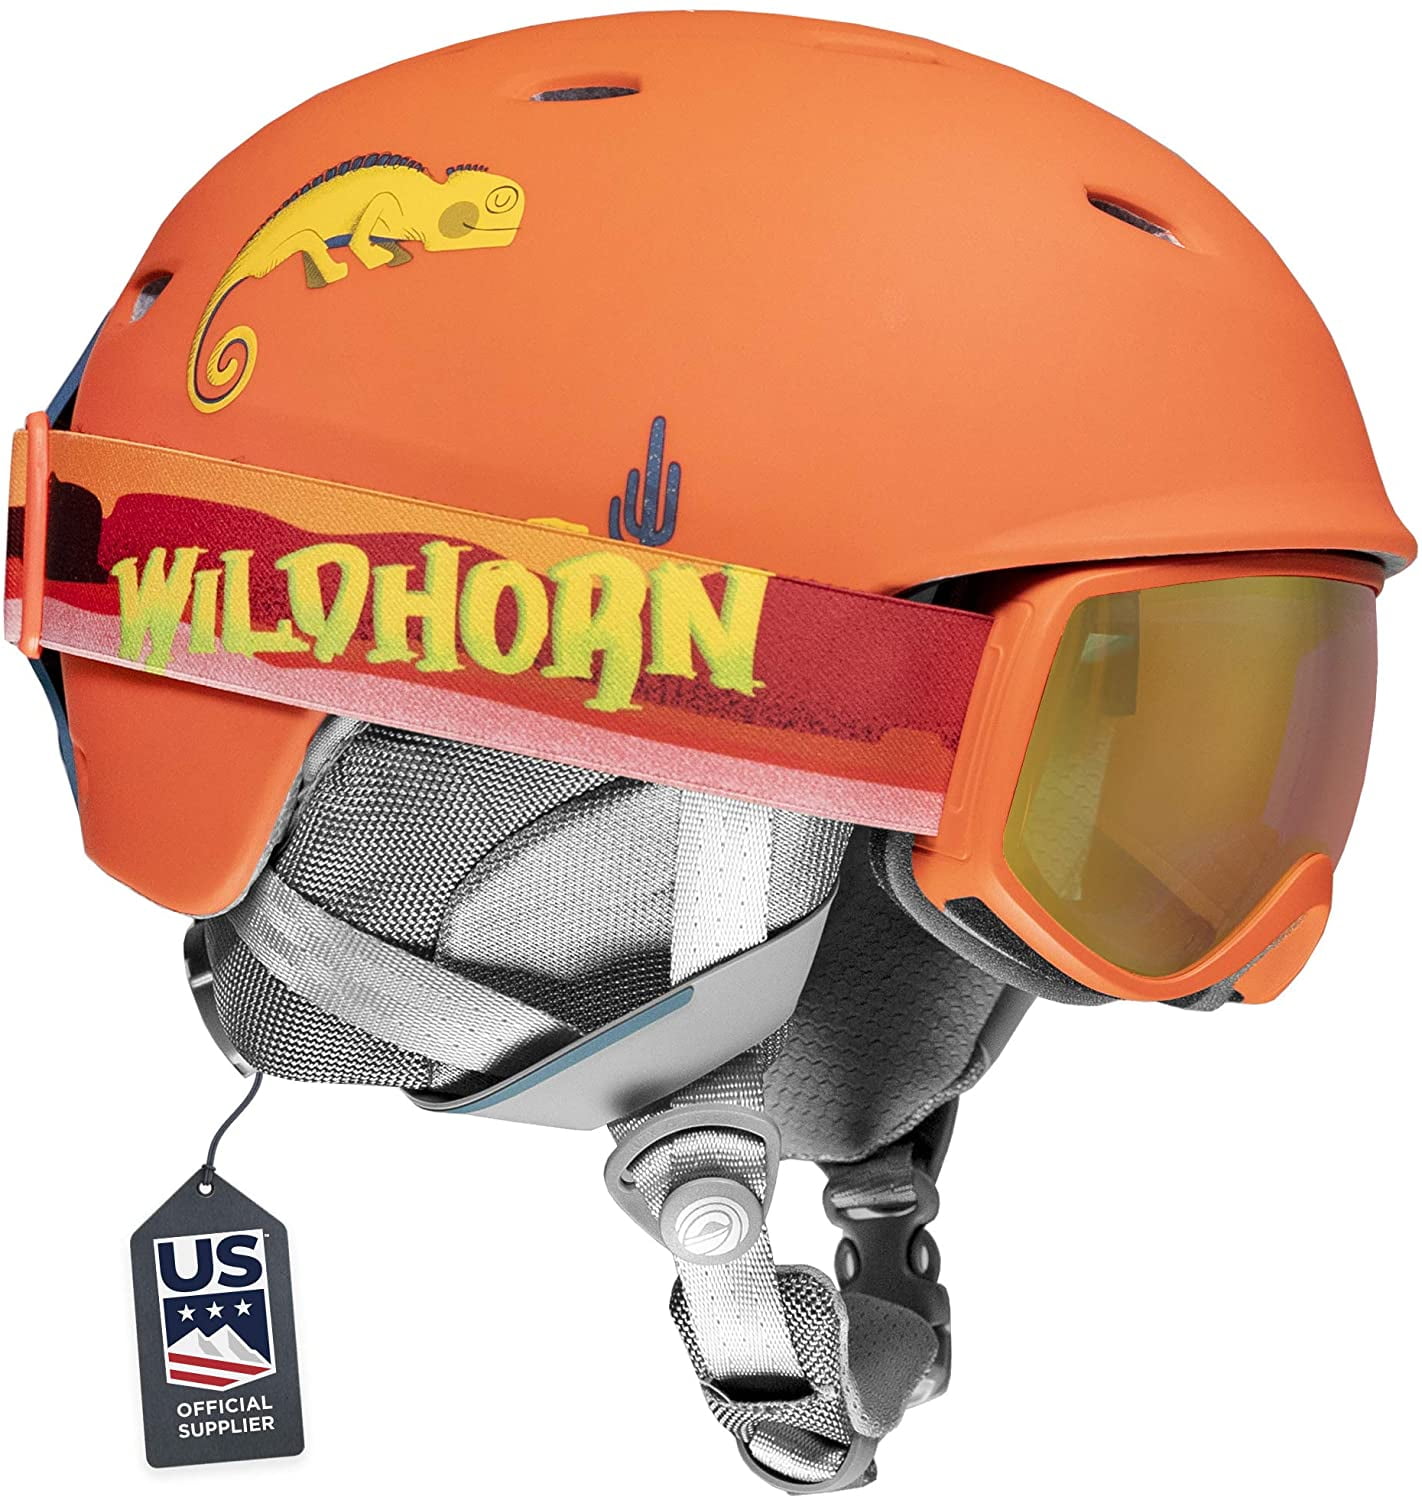 ASTM Certified US Ski Team Official Supplier Wildhorn Spire Snow & Ski Helmet w/Goggles for Kids and Youth 